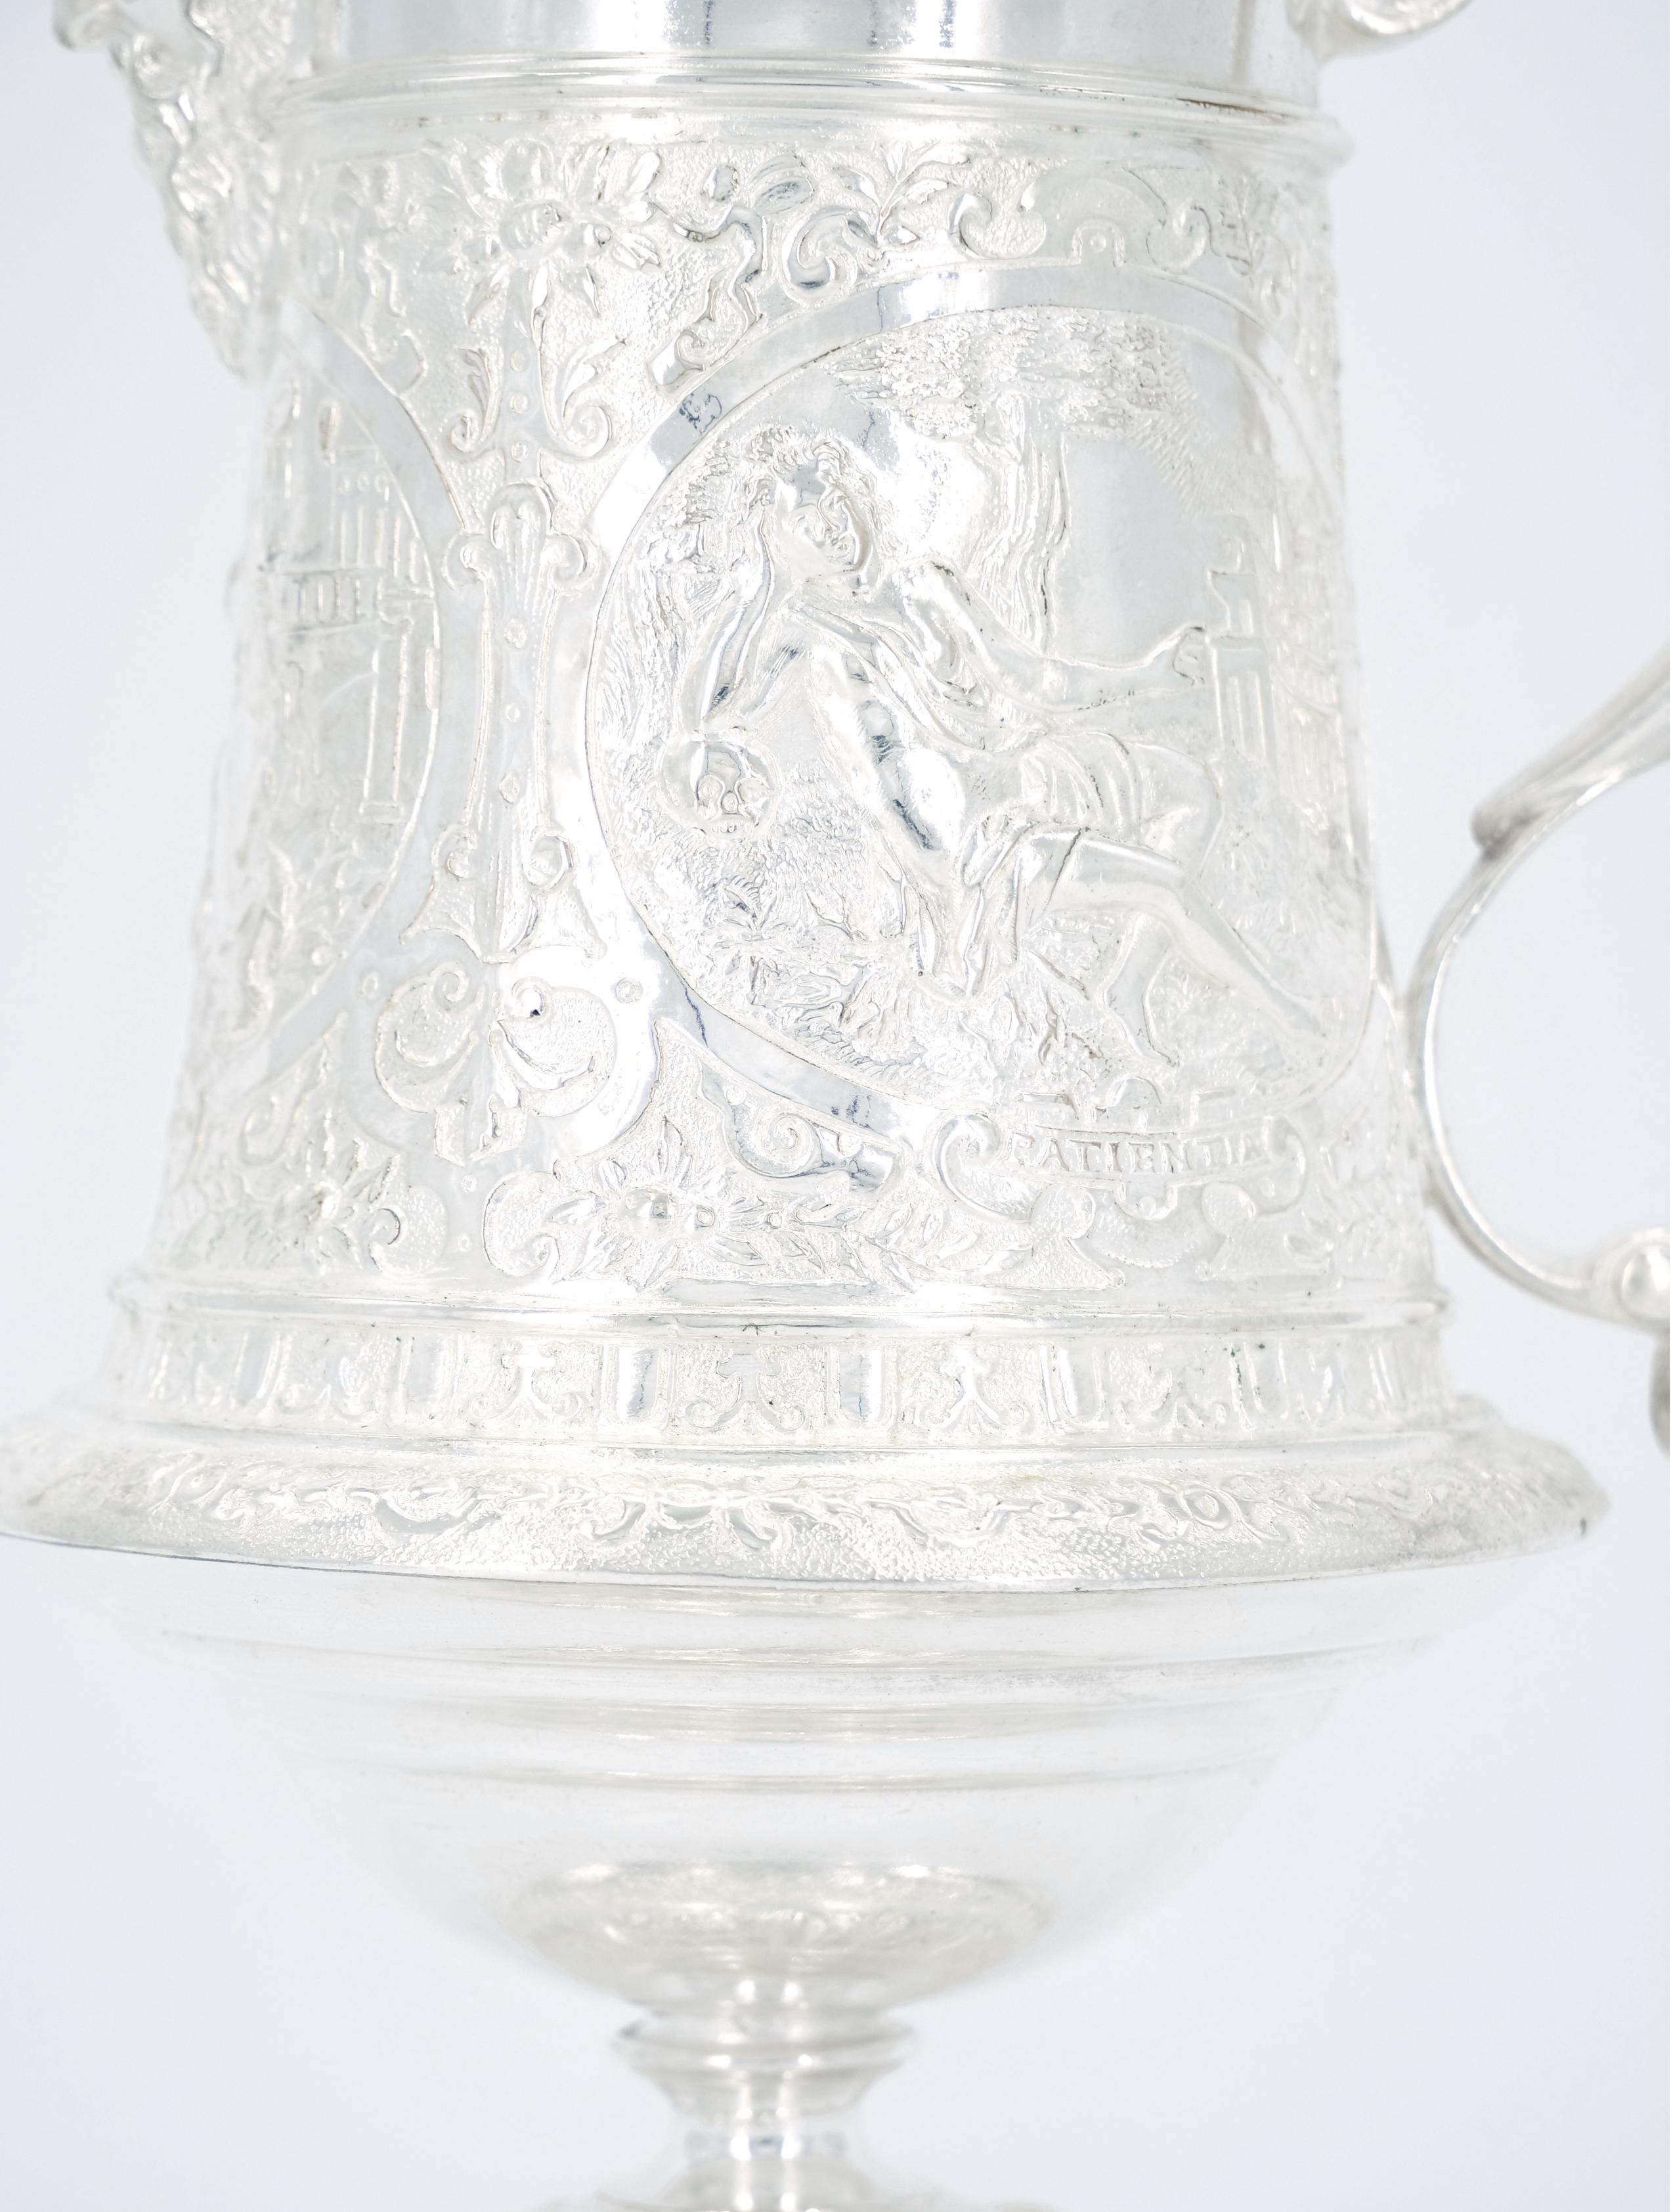 Late 19th century English silver plate barware / tableware serving jug by Joan Grinsell. The Jug features an attached covered finial top of a soldier with an heavily all over body hand decorated greek mythology goddess figures. The jug is in great